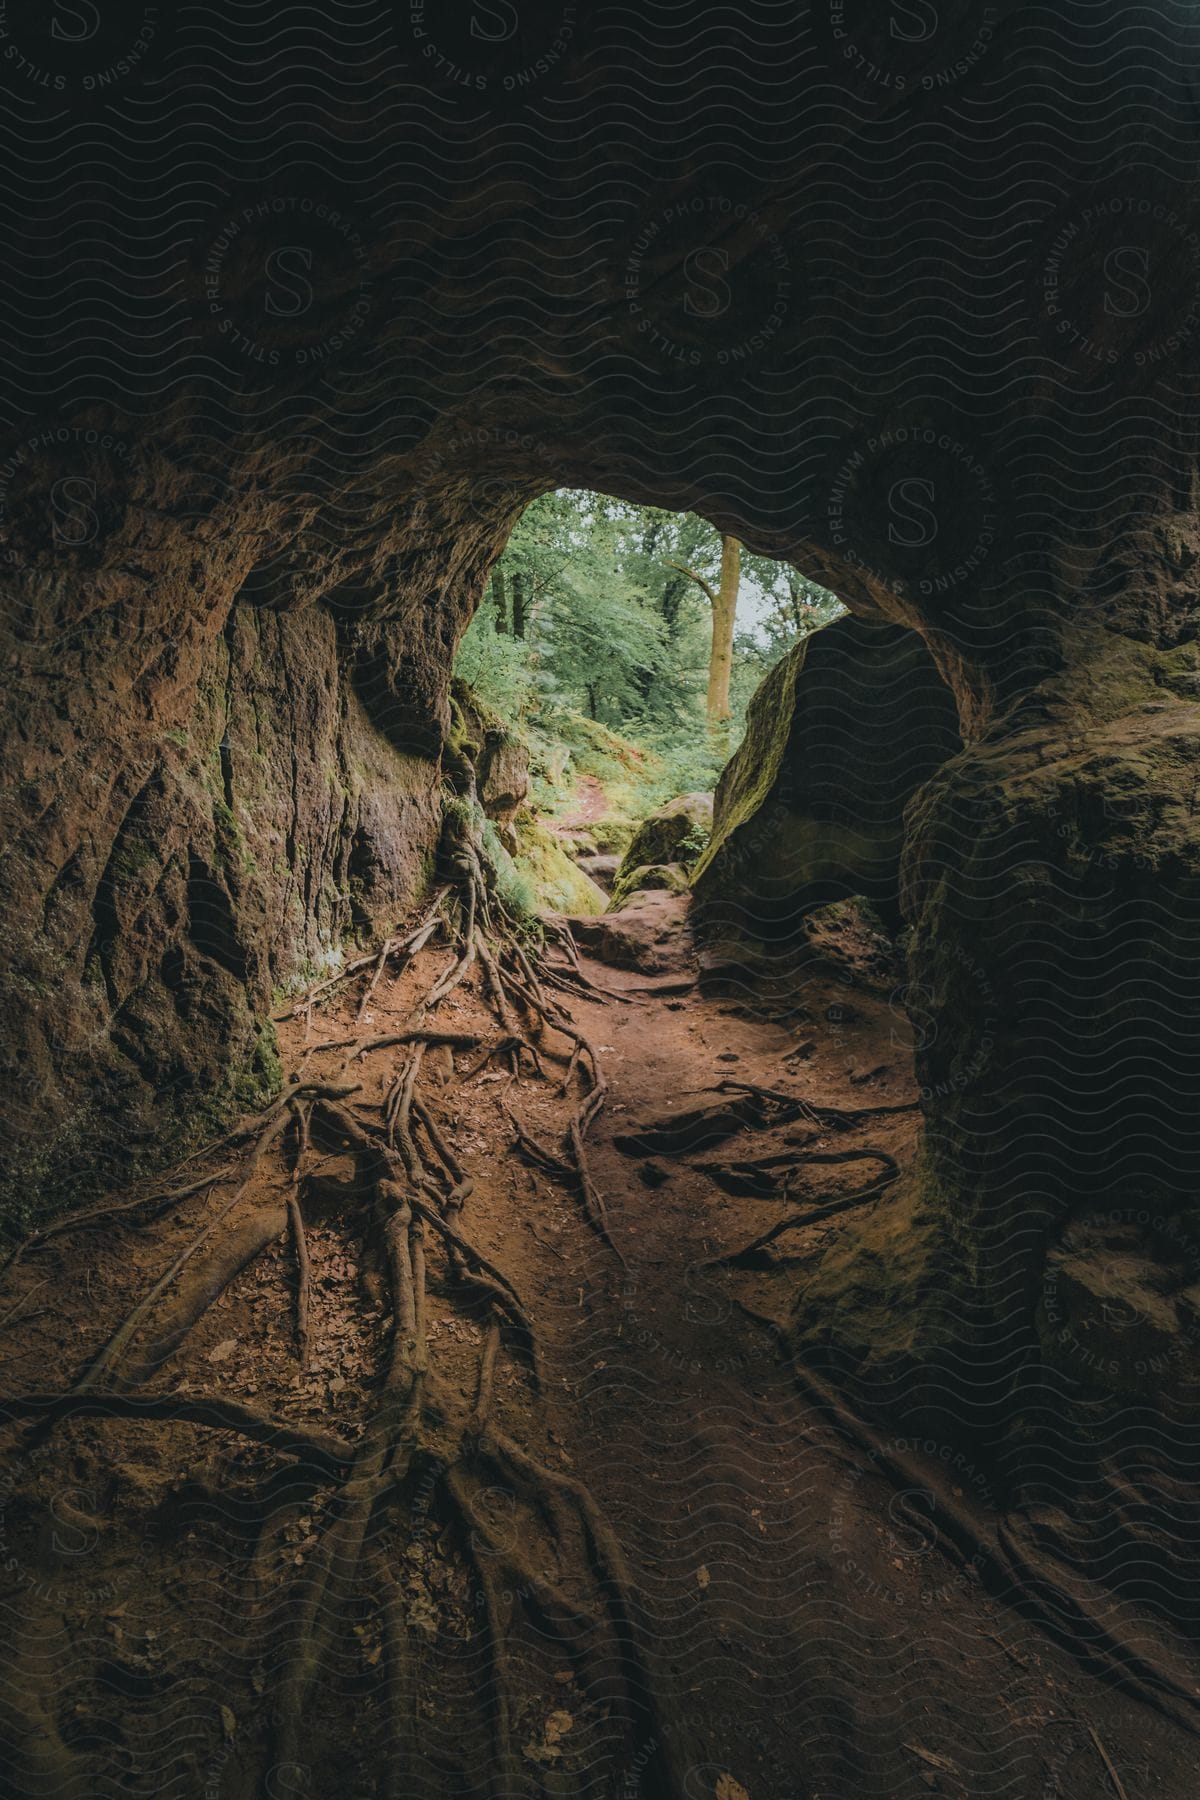 An old cave, its entrance adorned with descending tree roots, overlooks the forest. Outside, the landscape is adorned with trees and grasses, visible from within the cave.